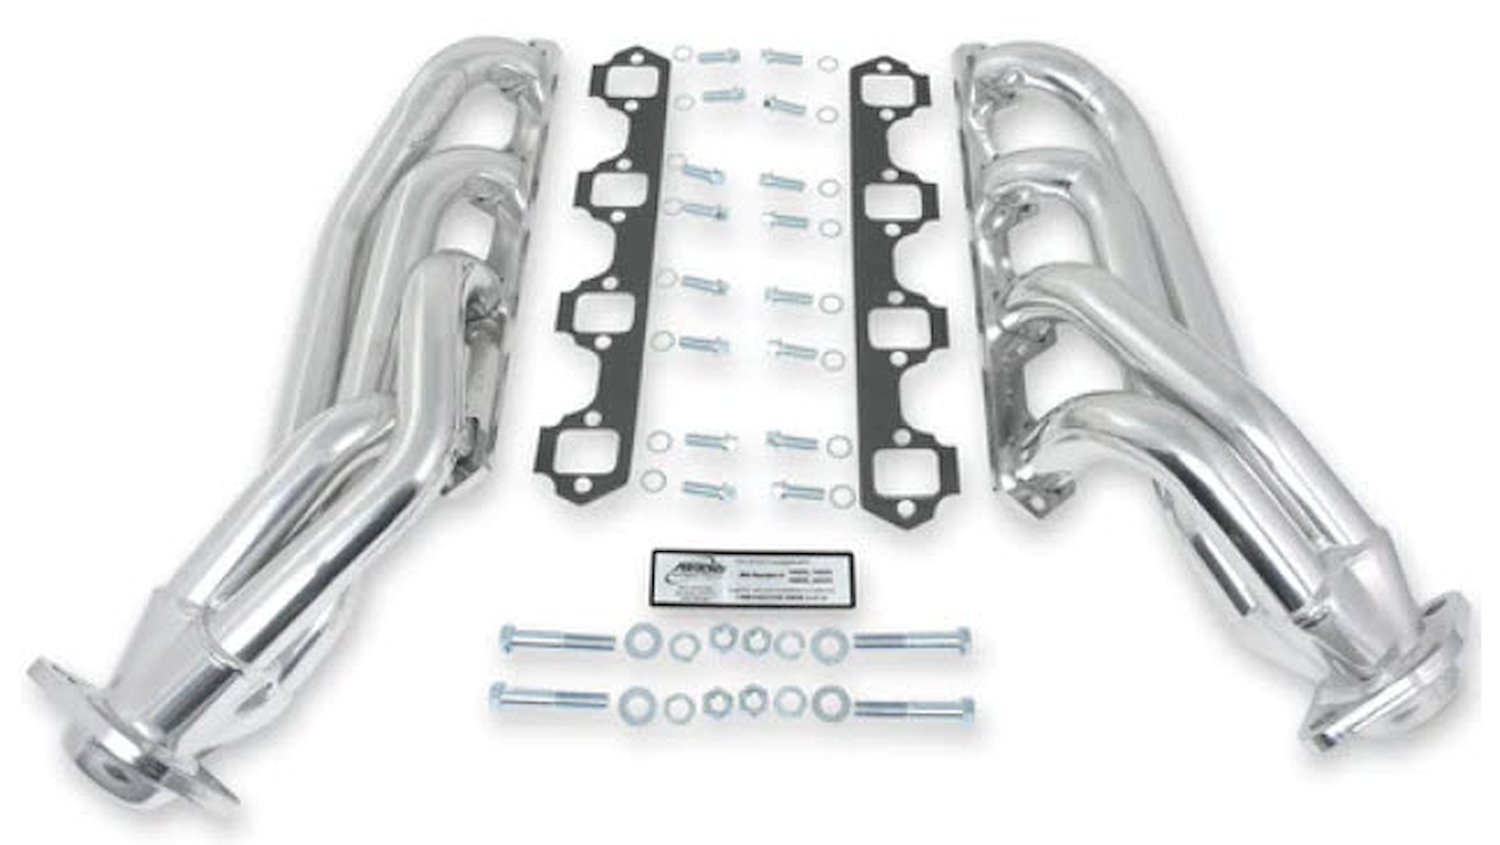 1850S-2JS Shorty Headers for 2002-2013 GM Trucks, SUVs  w/4.8, 5.3, 6.0, 6.2L Engines [Silver Ceramic Coated]